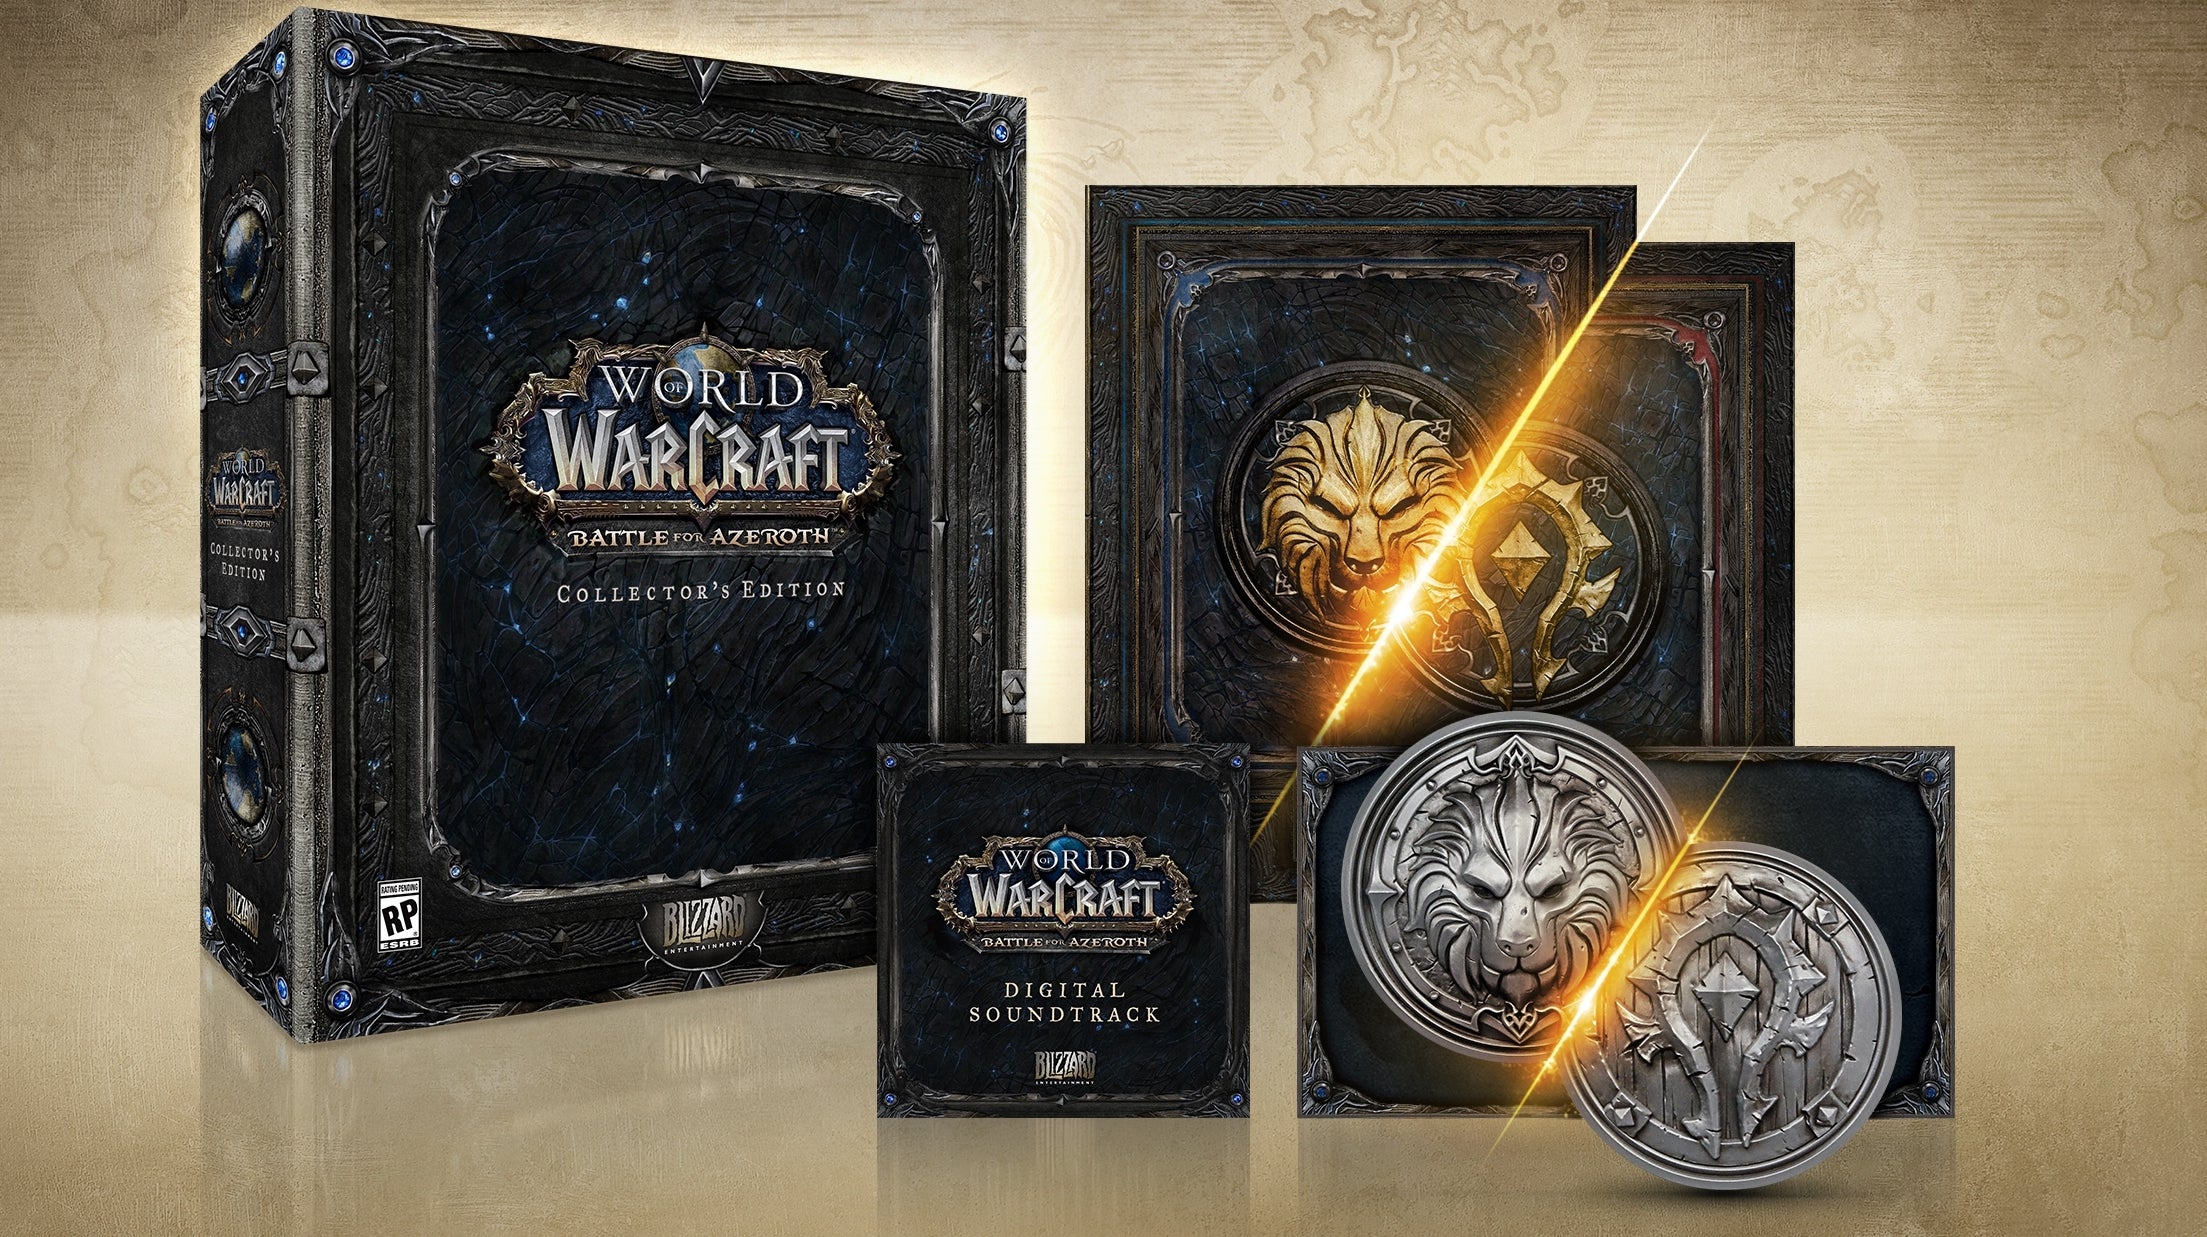 Imagem para World of Warcraft: Battle for Azeroth - Unboxing à Collector's Edition